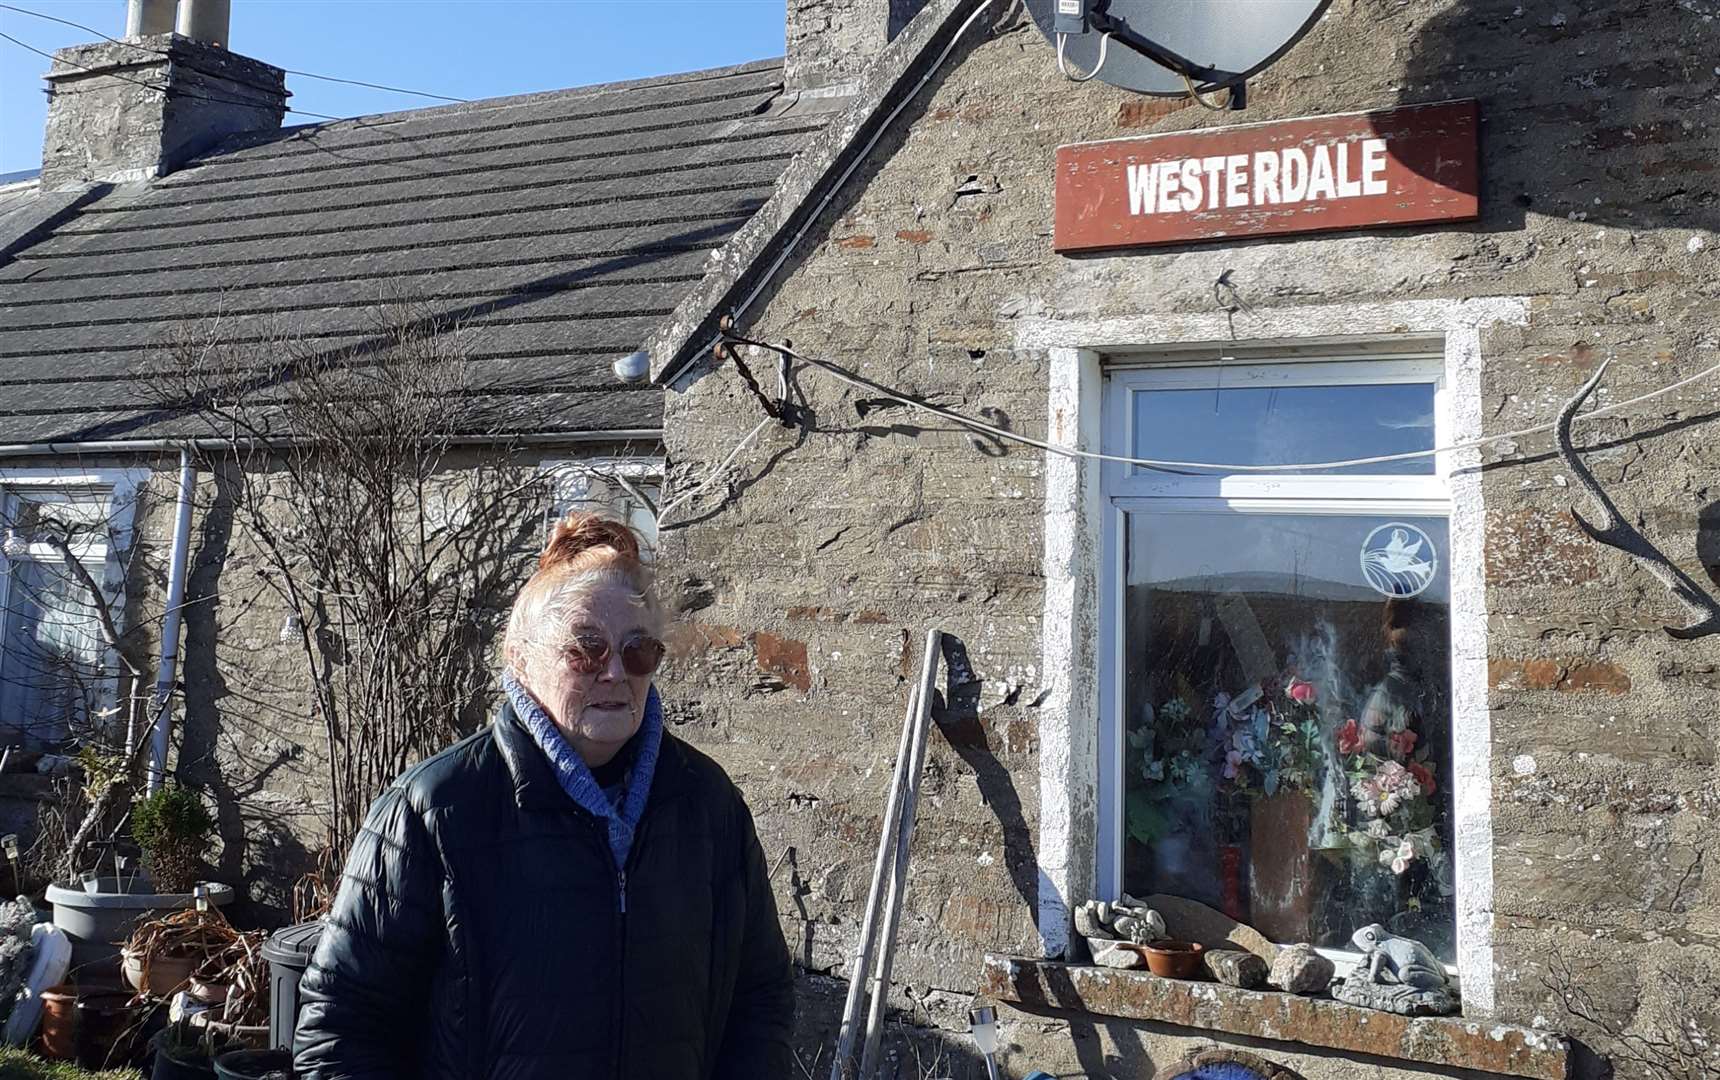 Barbara MacKay outside her home at Westerdale.